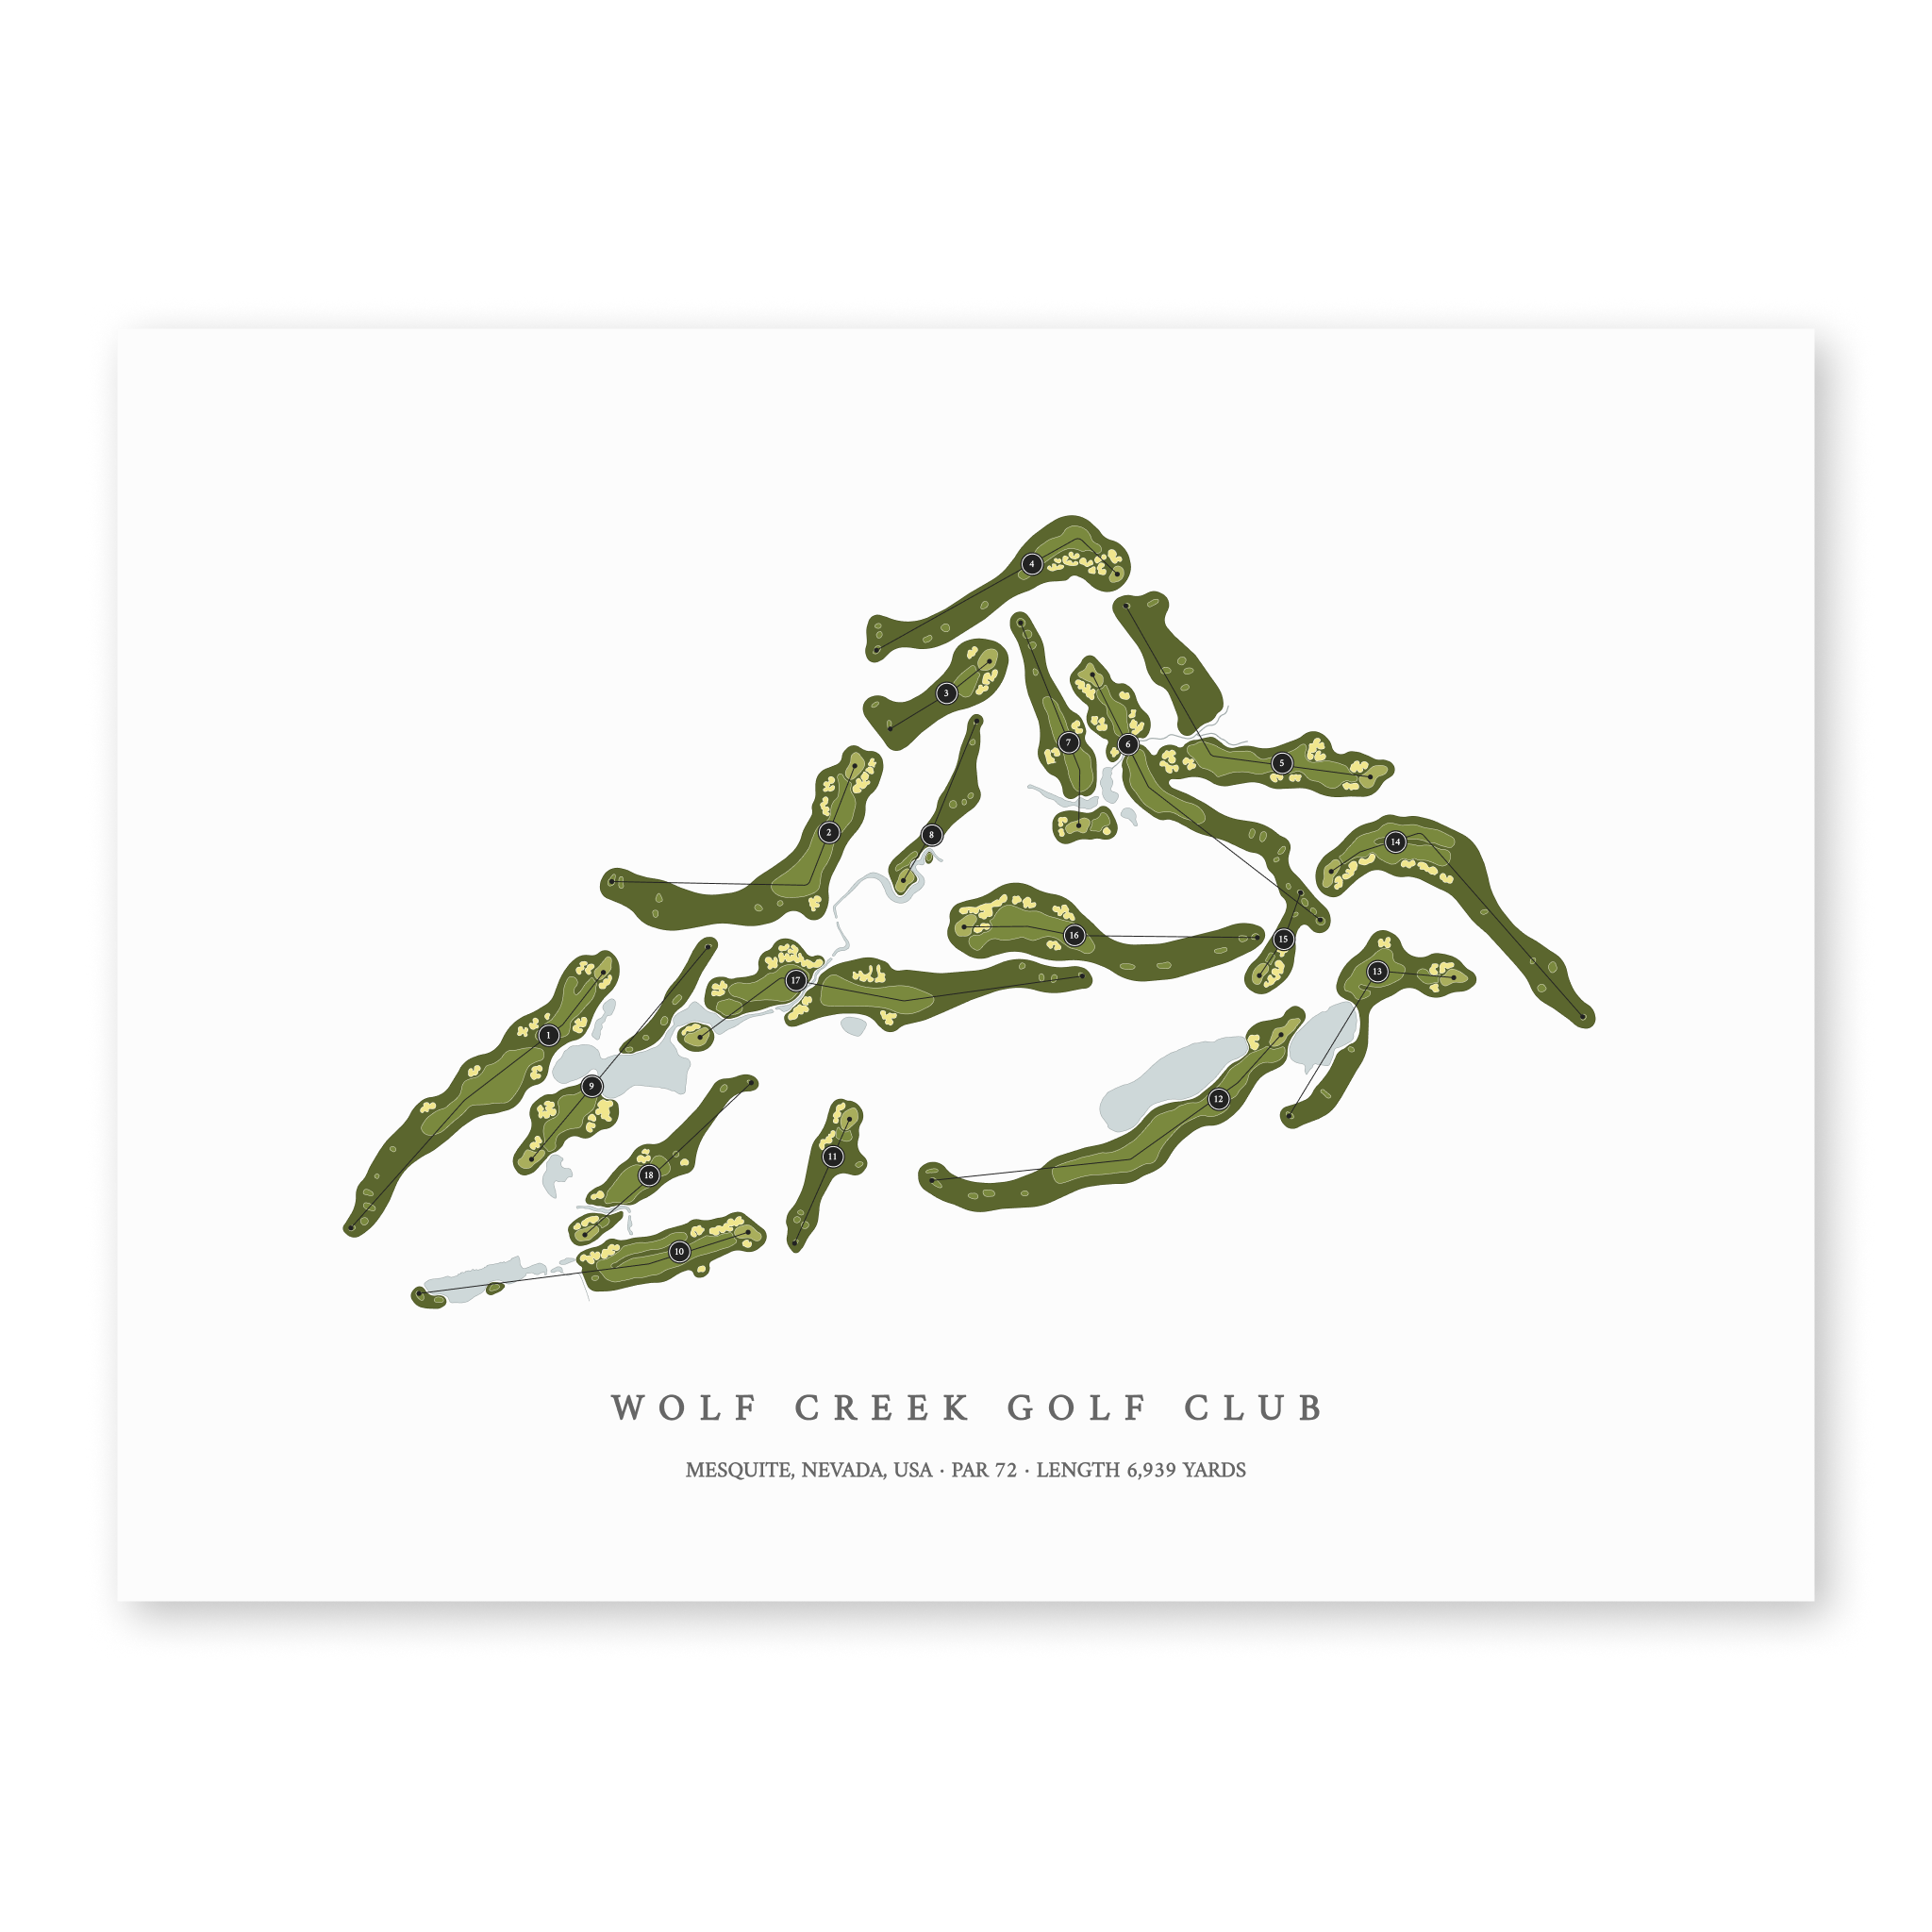 Wolf Creek Golf Club| Golf Course Print | Unframed With Hole Numbers #hole numbers_yes